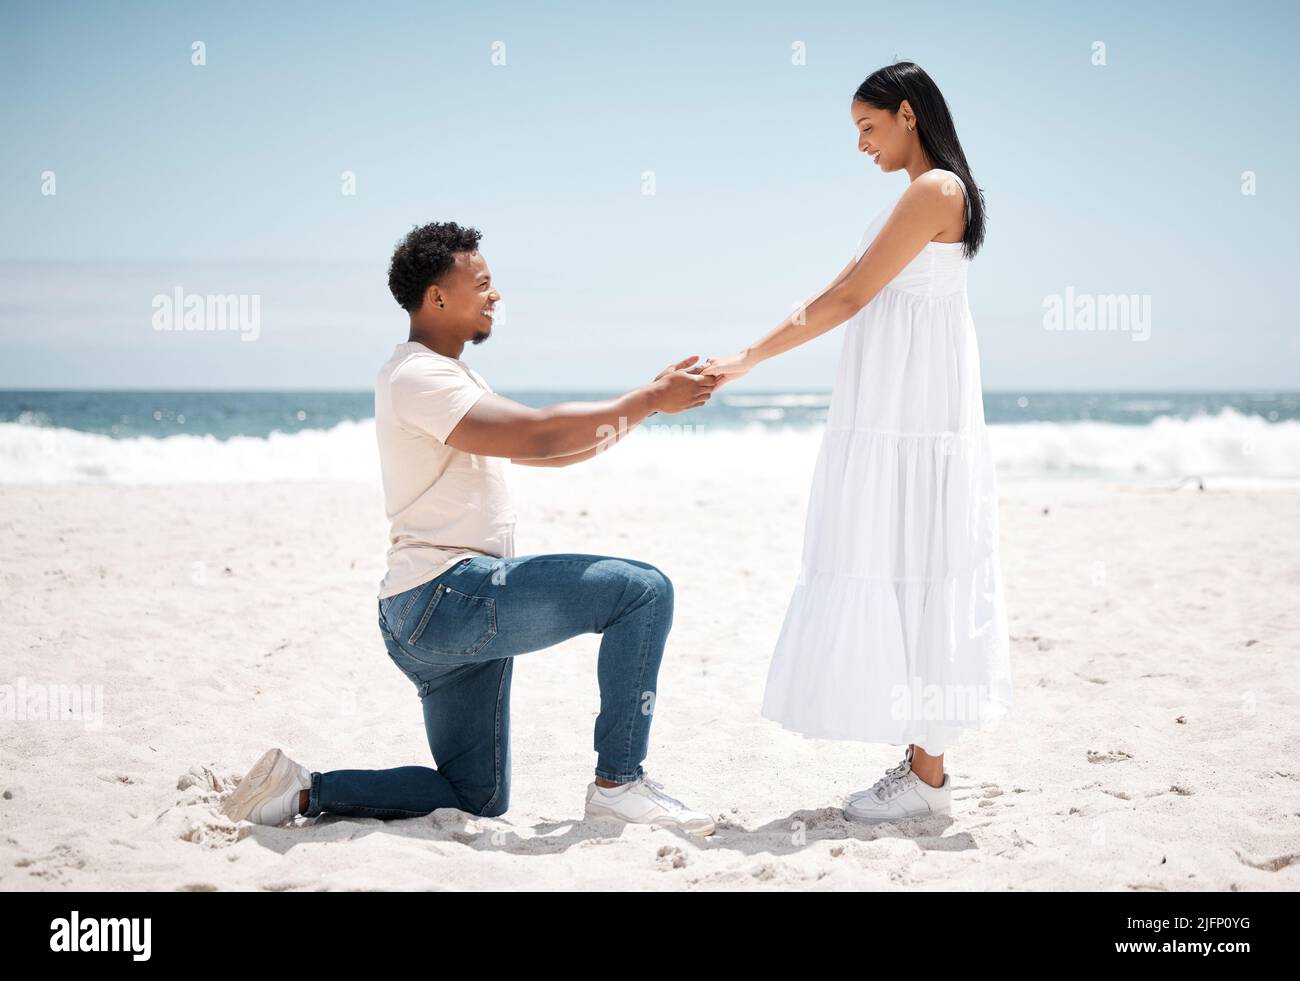 My always, my forever. Shot of a young man proposing to his girlfriend at the beach. Stock Photo